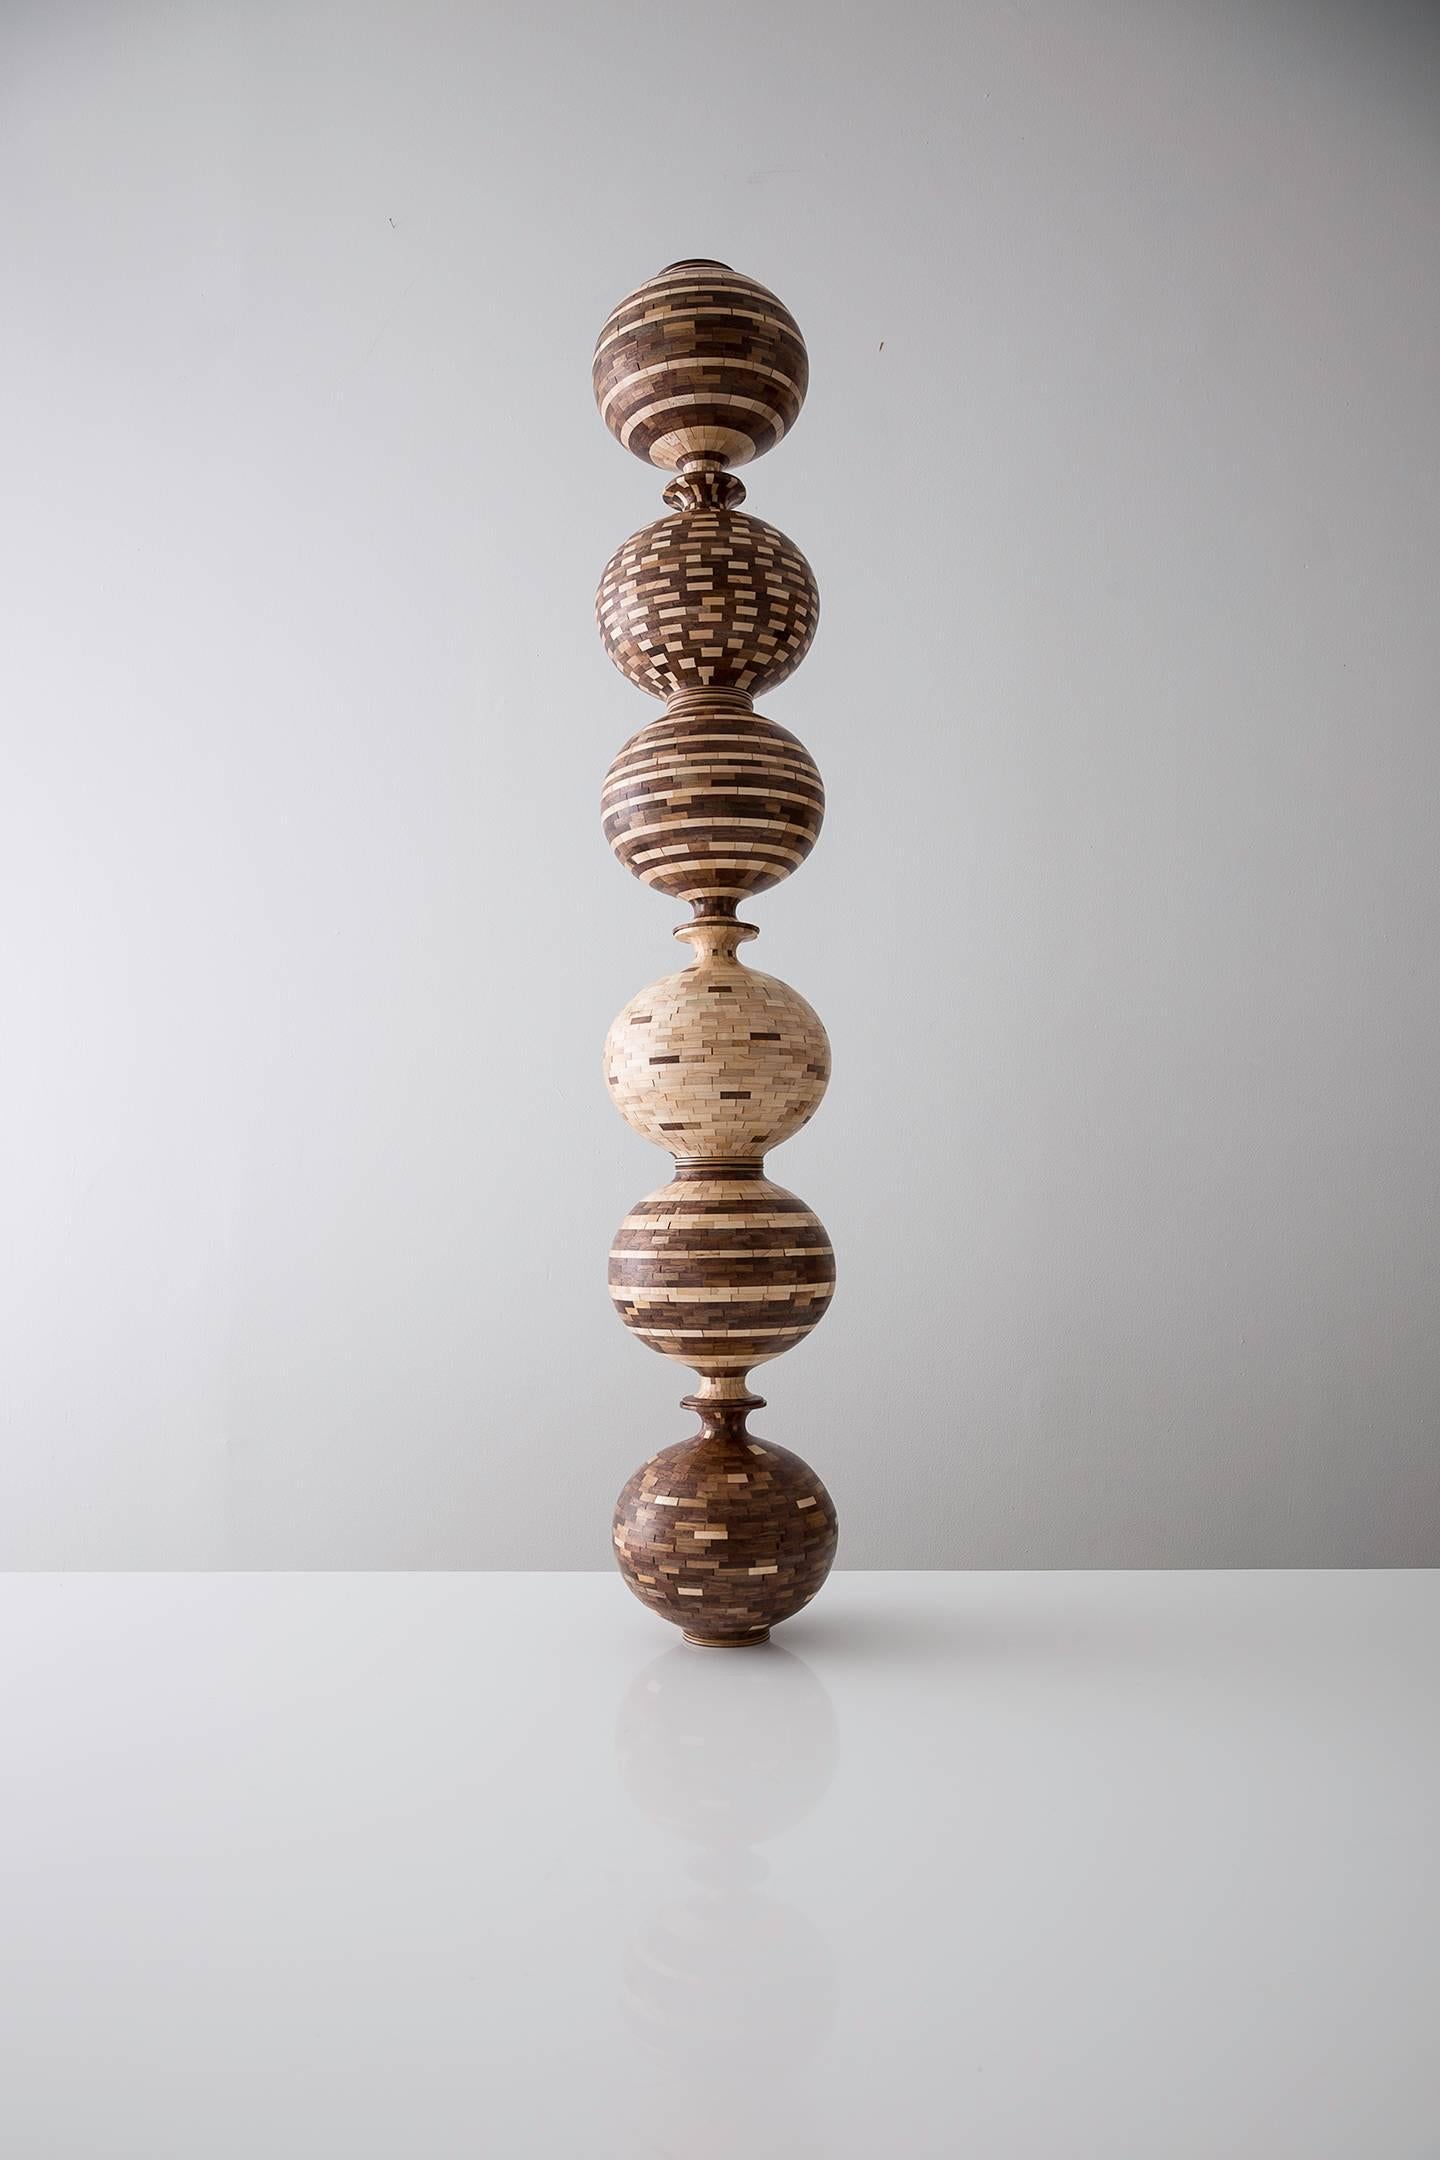 American STACKED Walnut and Maple Patterned Vase by Richard Haining, Available Now